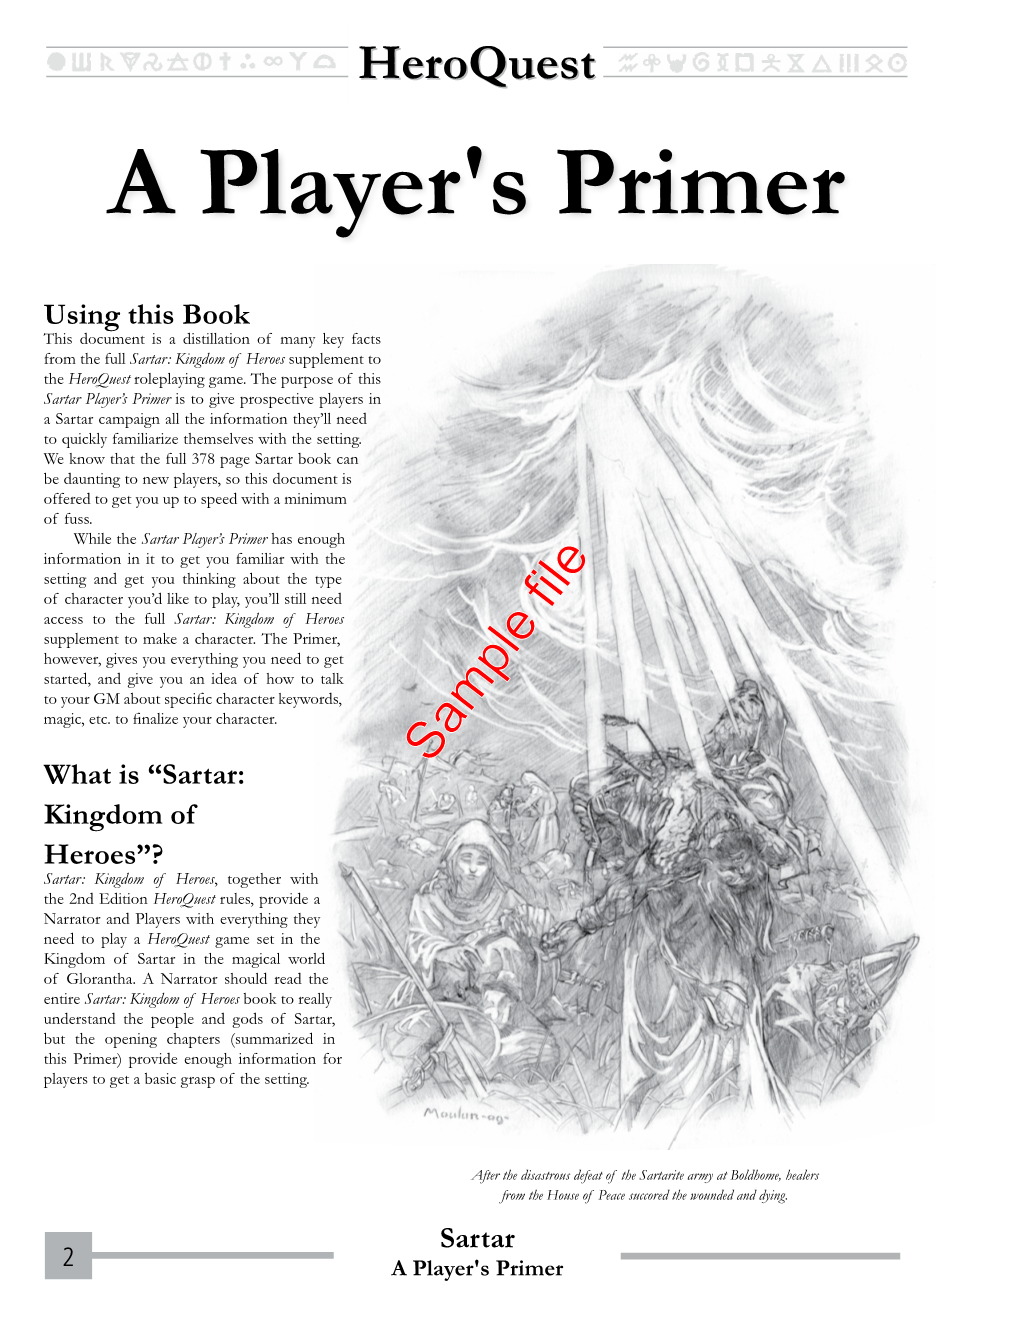 A Player's Primer